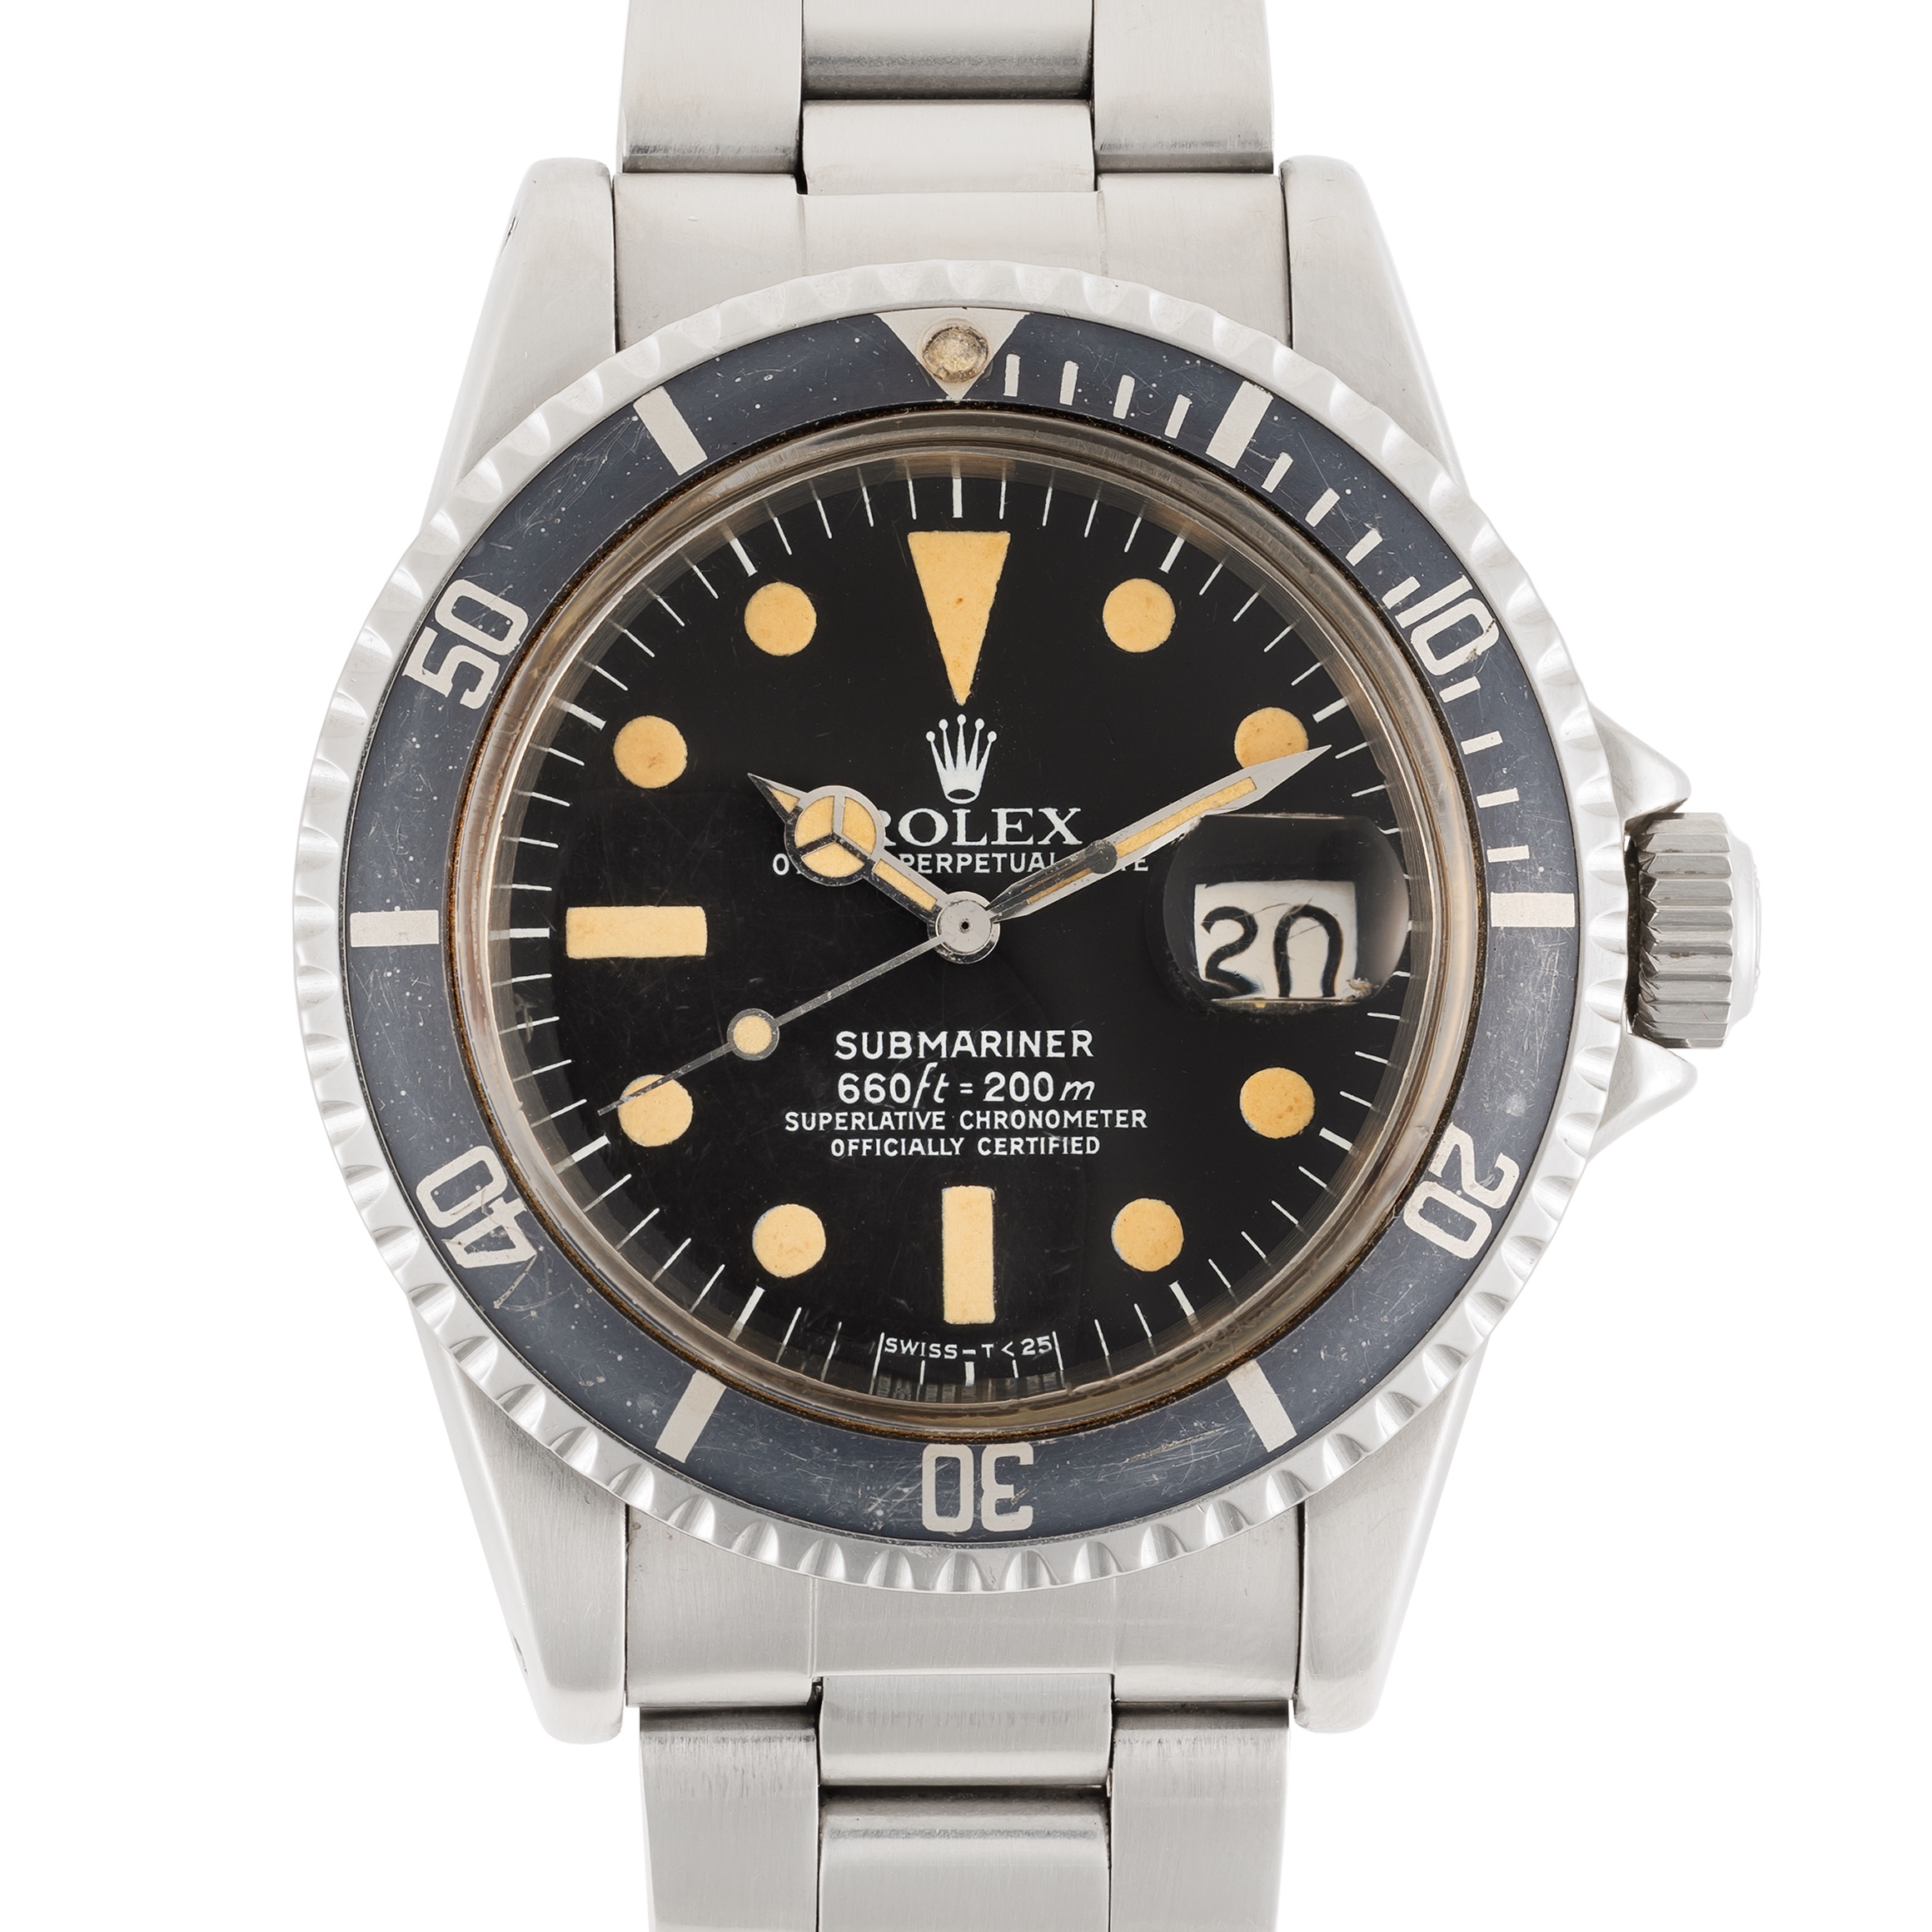 A GENTLEMAN'S SIZE STAINLESS STEEL ROLEX OYSTER PERPETUAL DATE SUBMARINER BRACELET WATCH CIRCA 1979, - Image 3 of 10